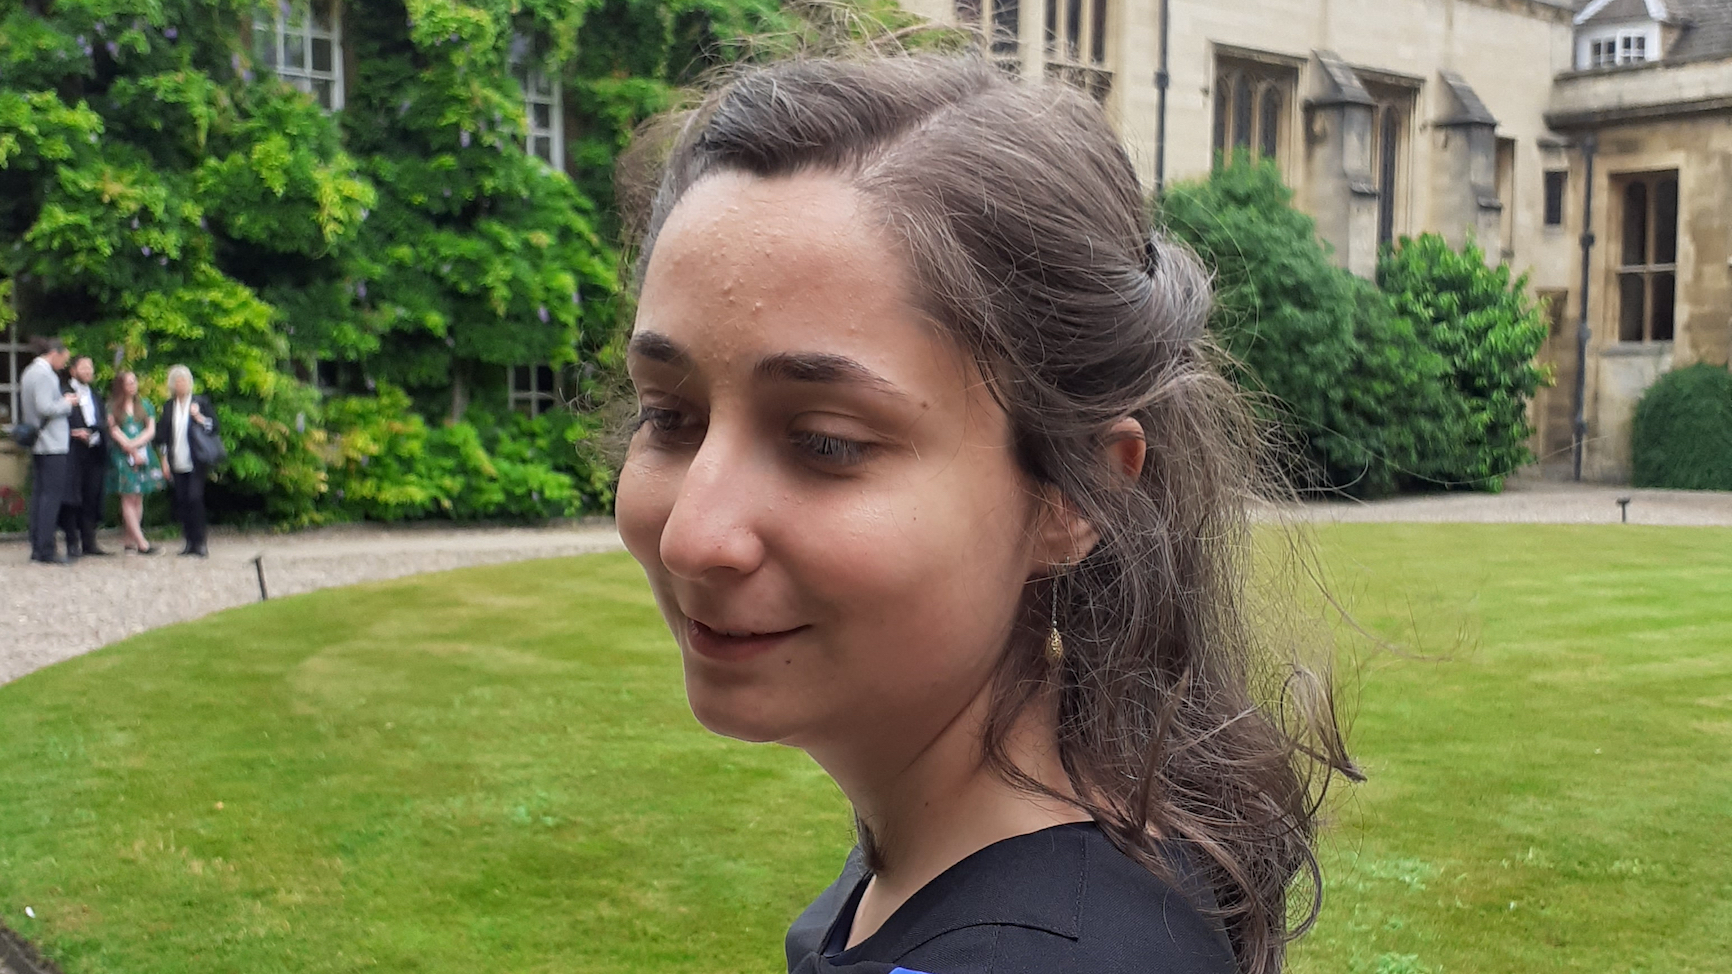 PhD student Clara Cuonzo, in profile, graduation robe just visible on her shoulders, standing on a green field of grass at Cambridge University